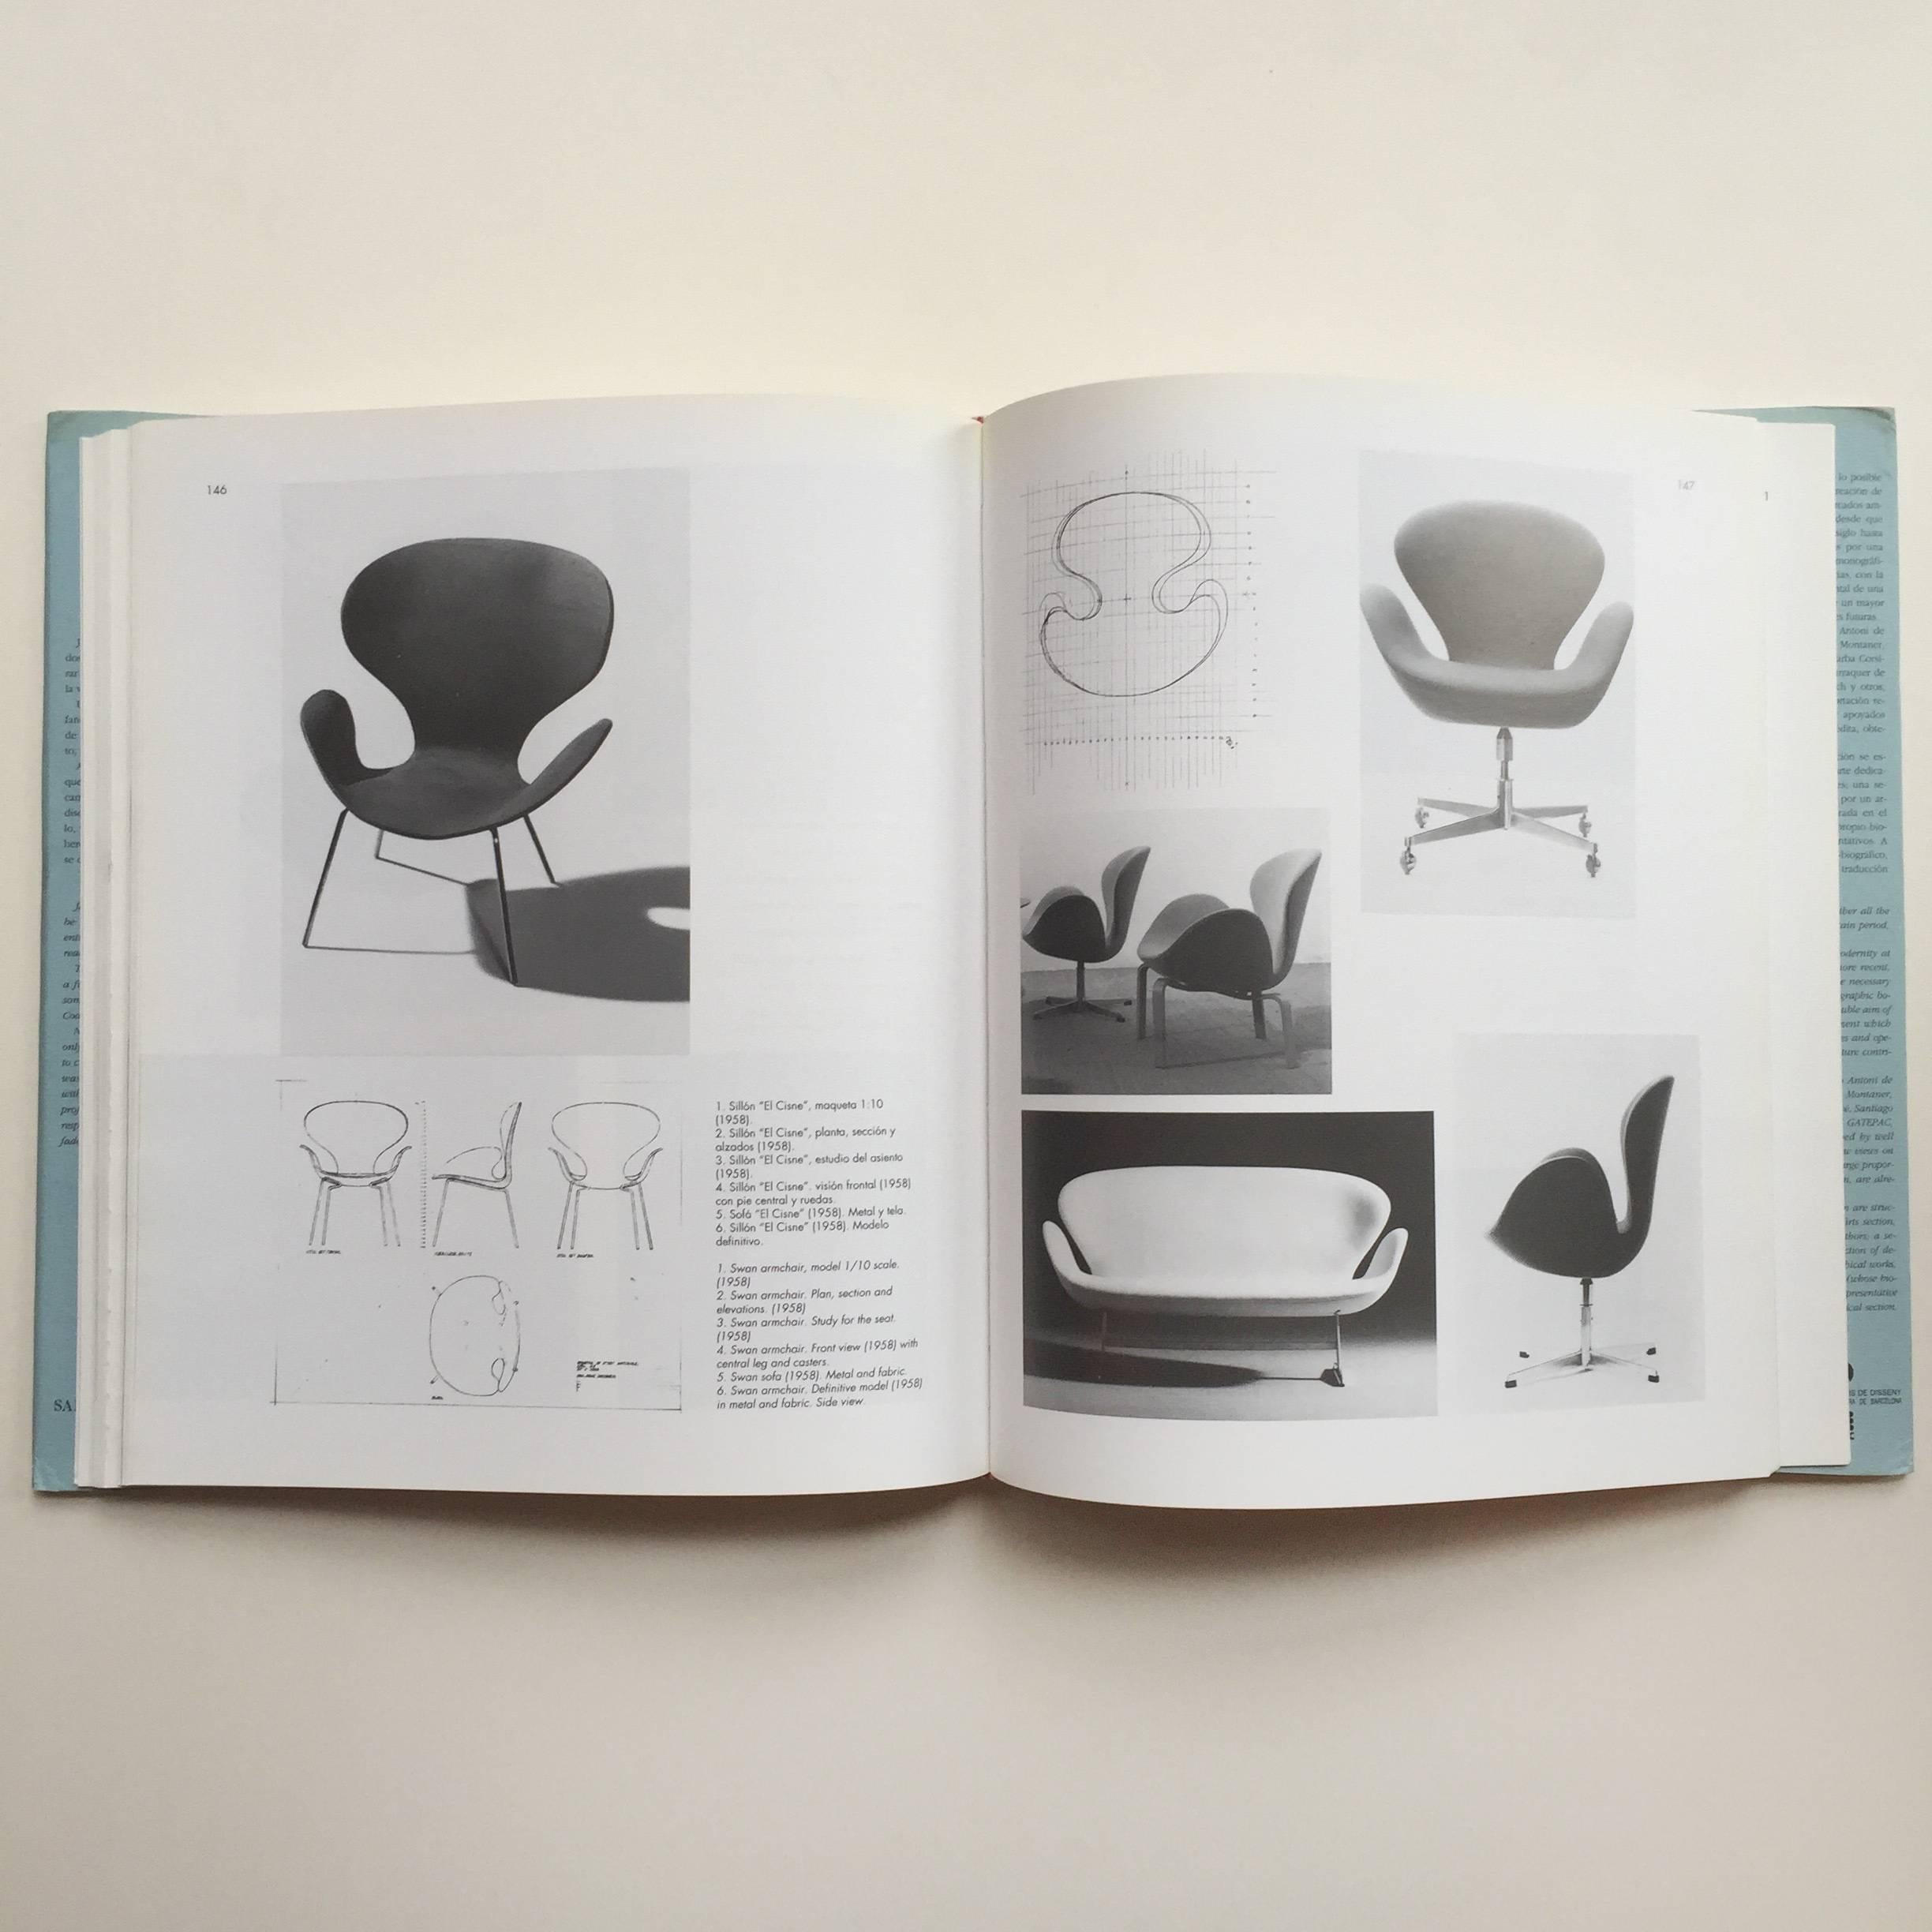 Published by Santa & Cole editions, 1991

On the subject of one of the most influential Swedish architects and designers of the 20th century, this is an in-depth monograph of both Jacobsen the man, and Jacobsen the designer. Including a